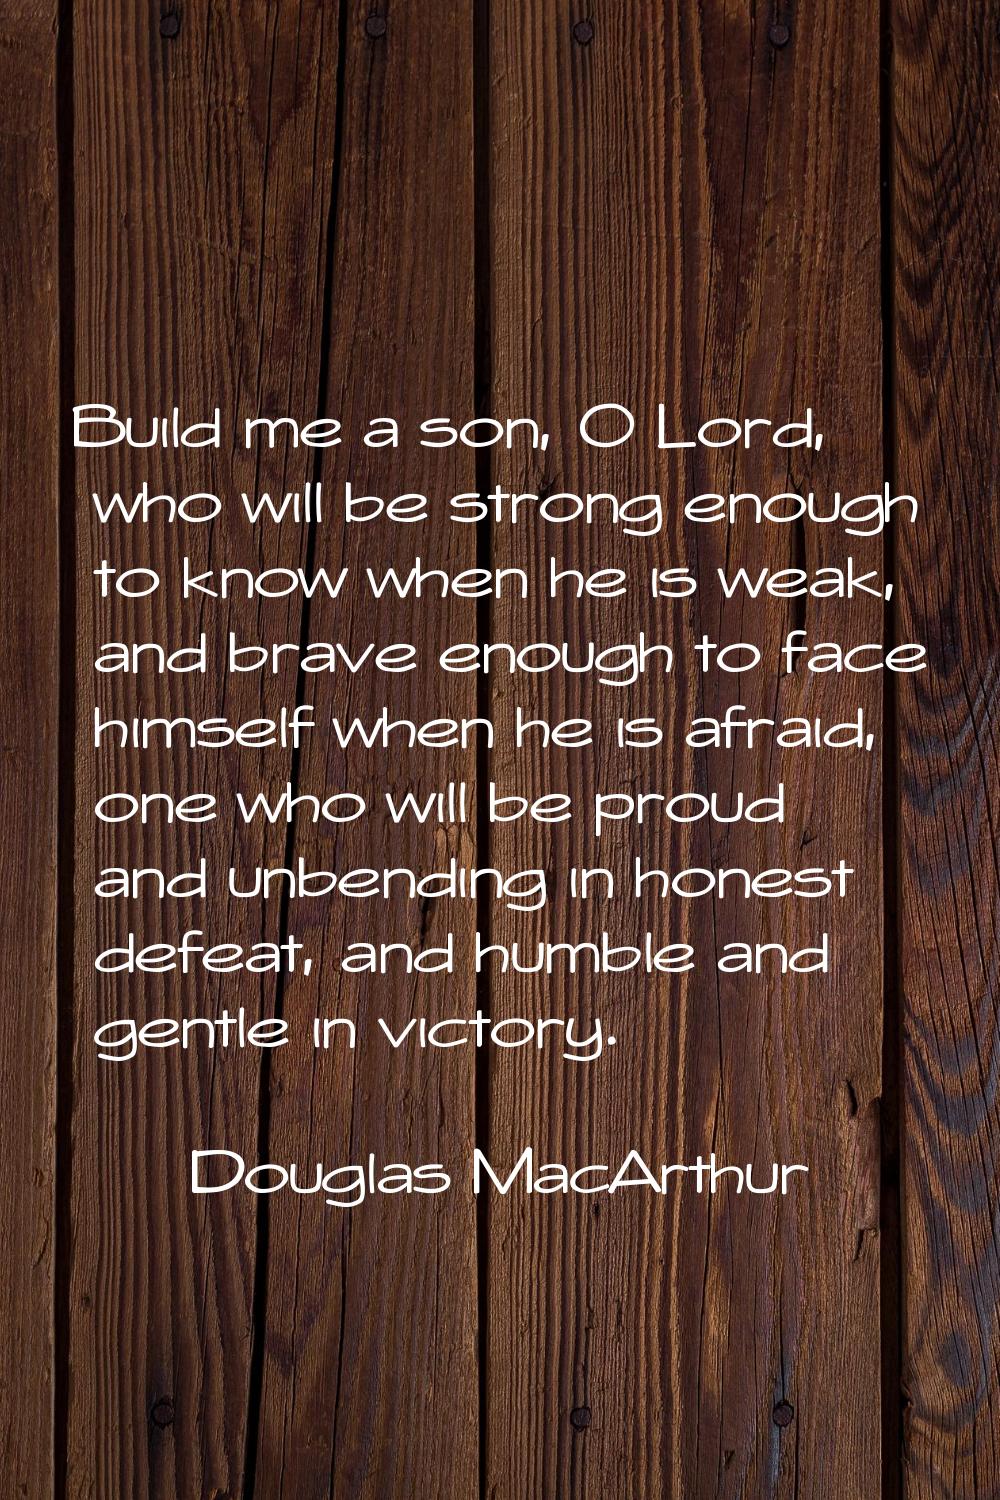 Build me a son, O Lord, who will be strong enough to know when he is weak, and brave enough to face